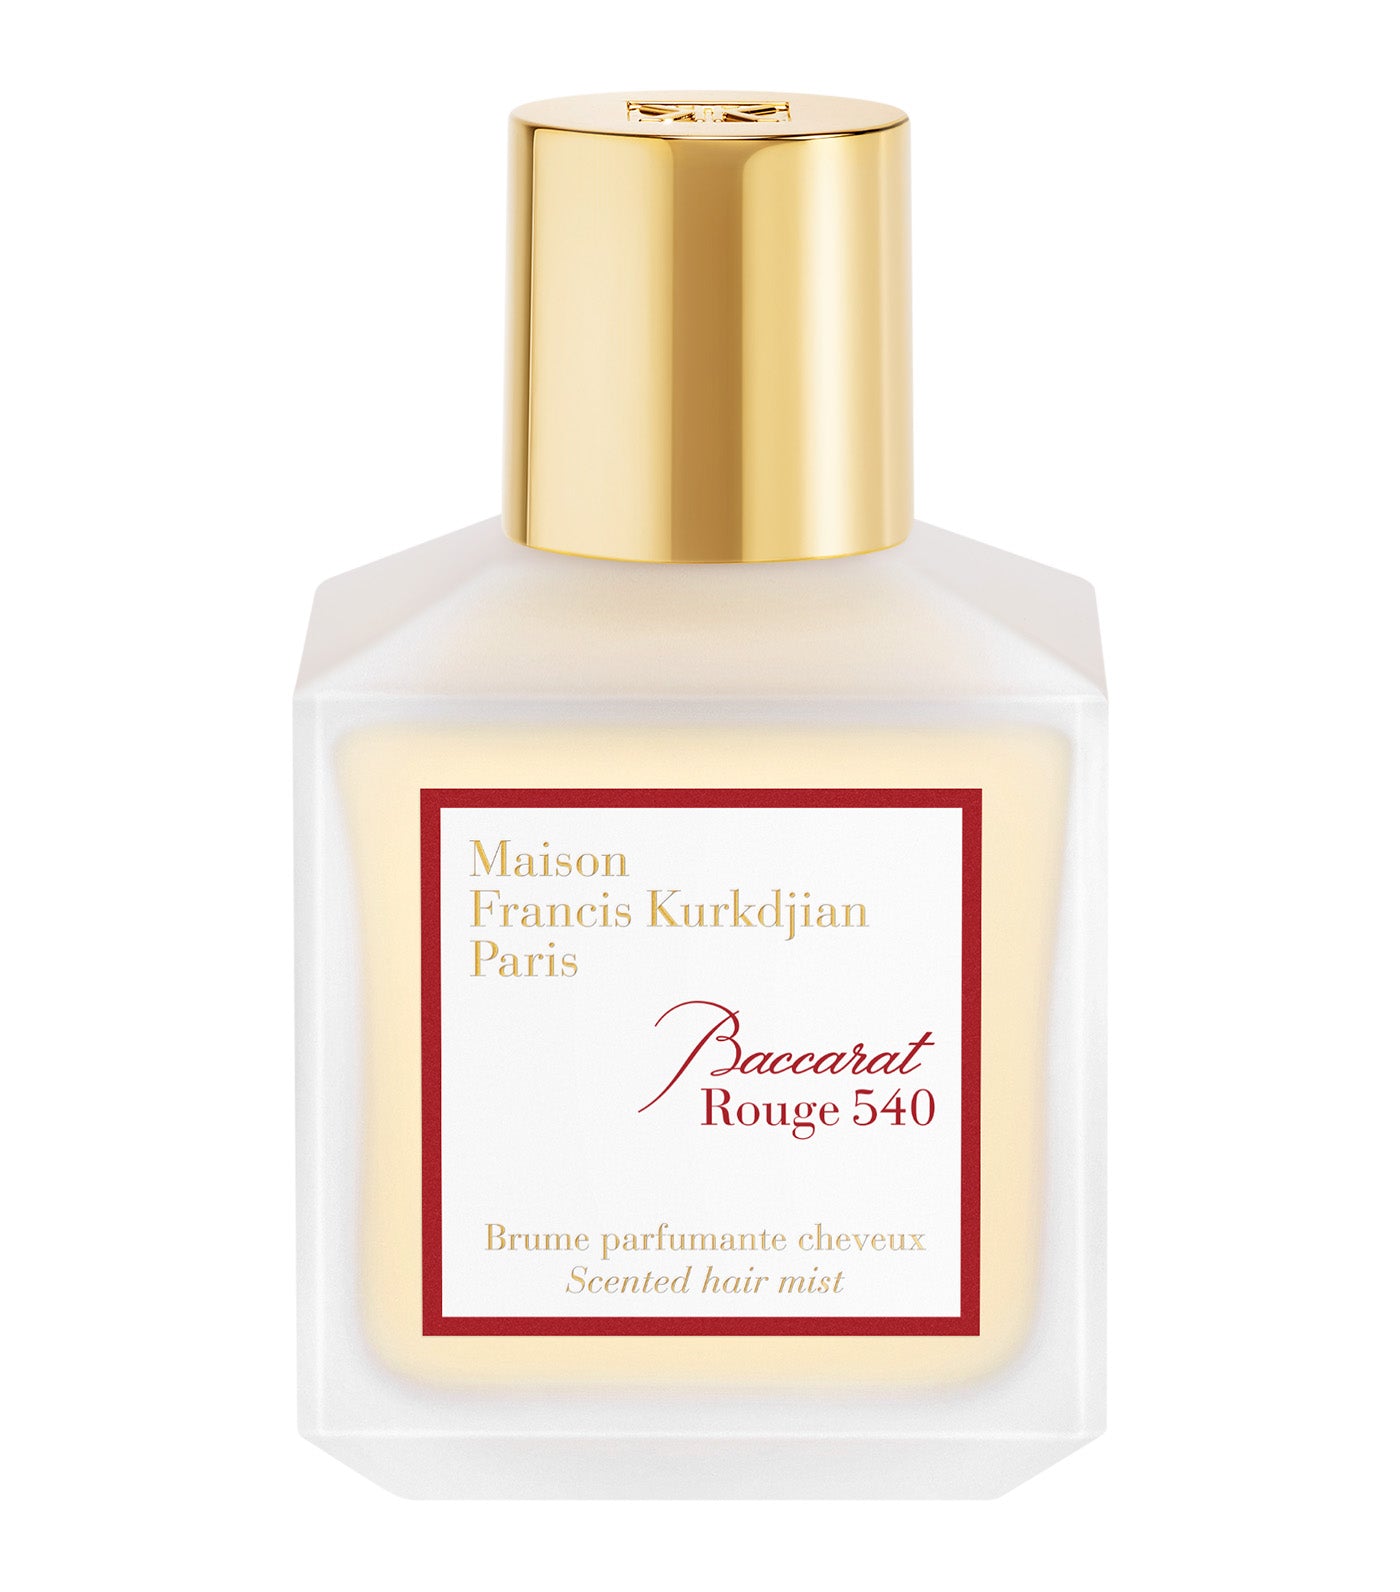 Baccarat Rouge 540 Scented Hair Mist